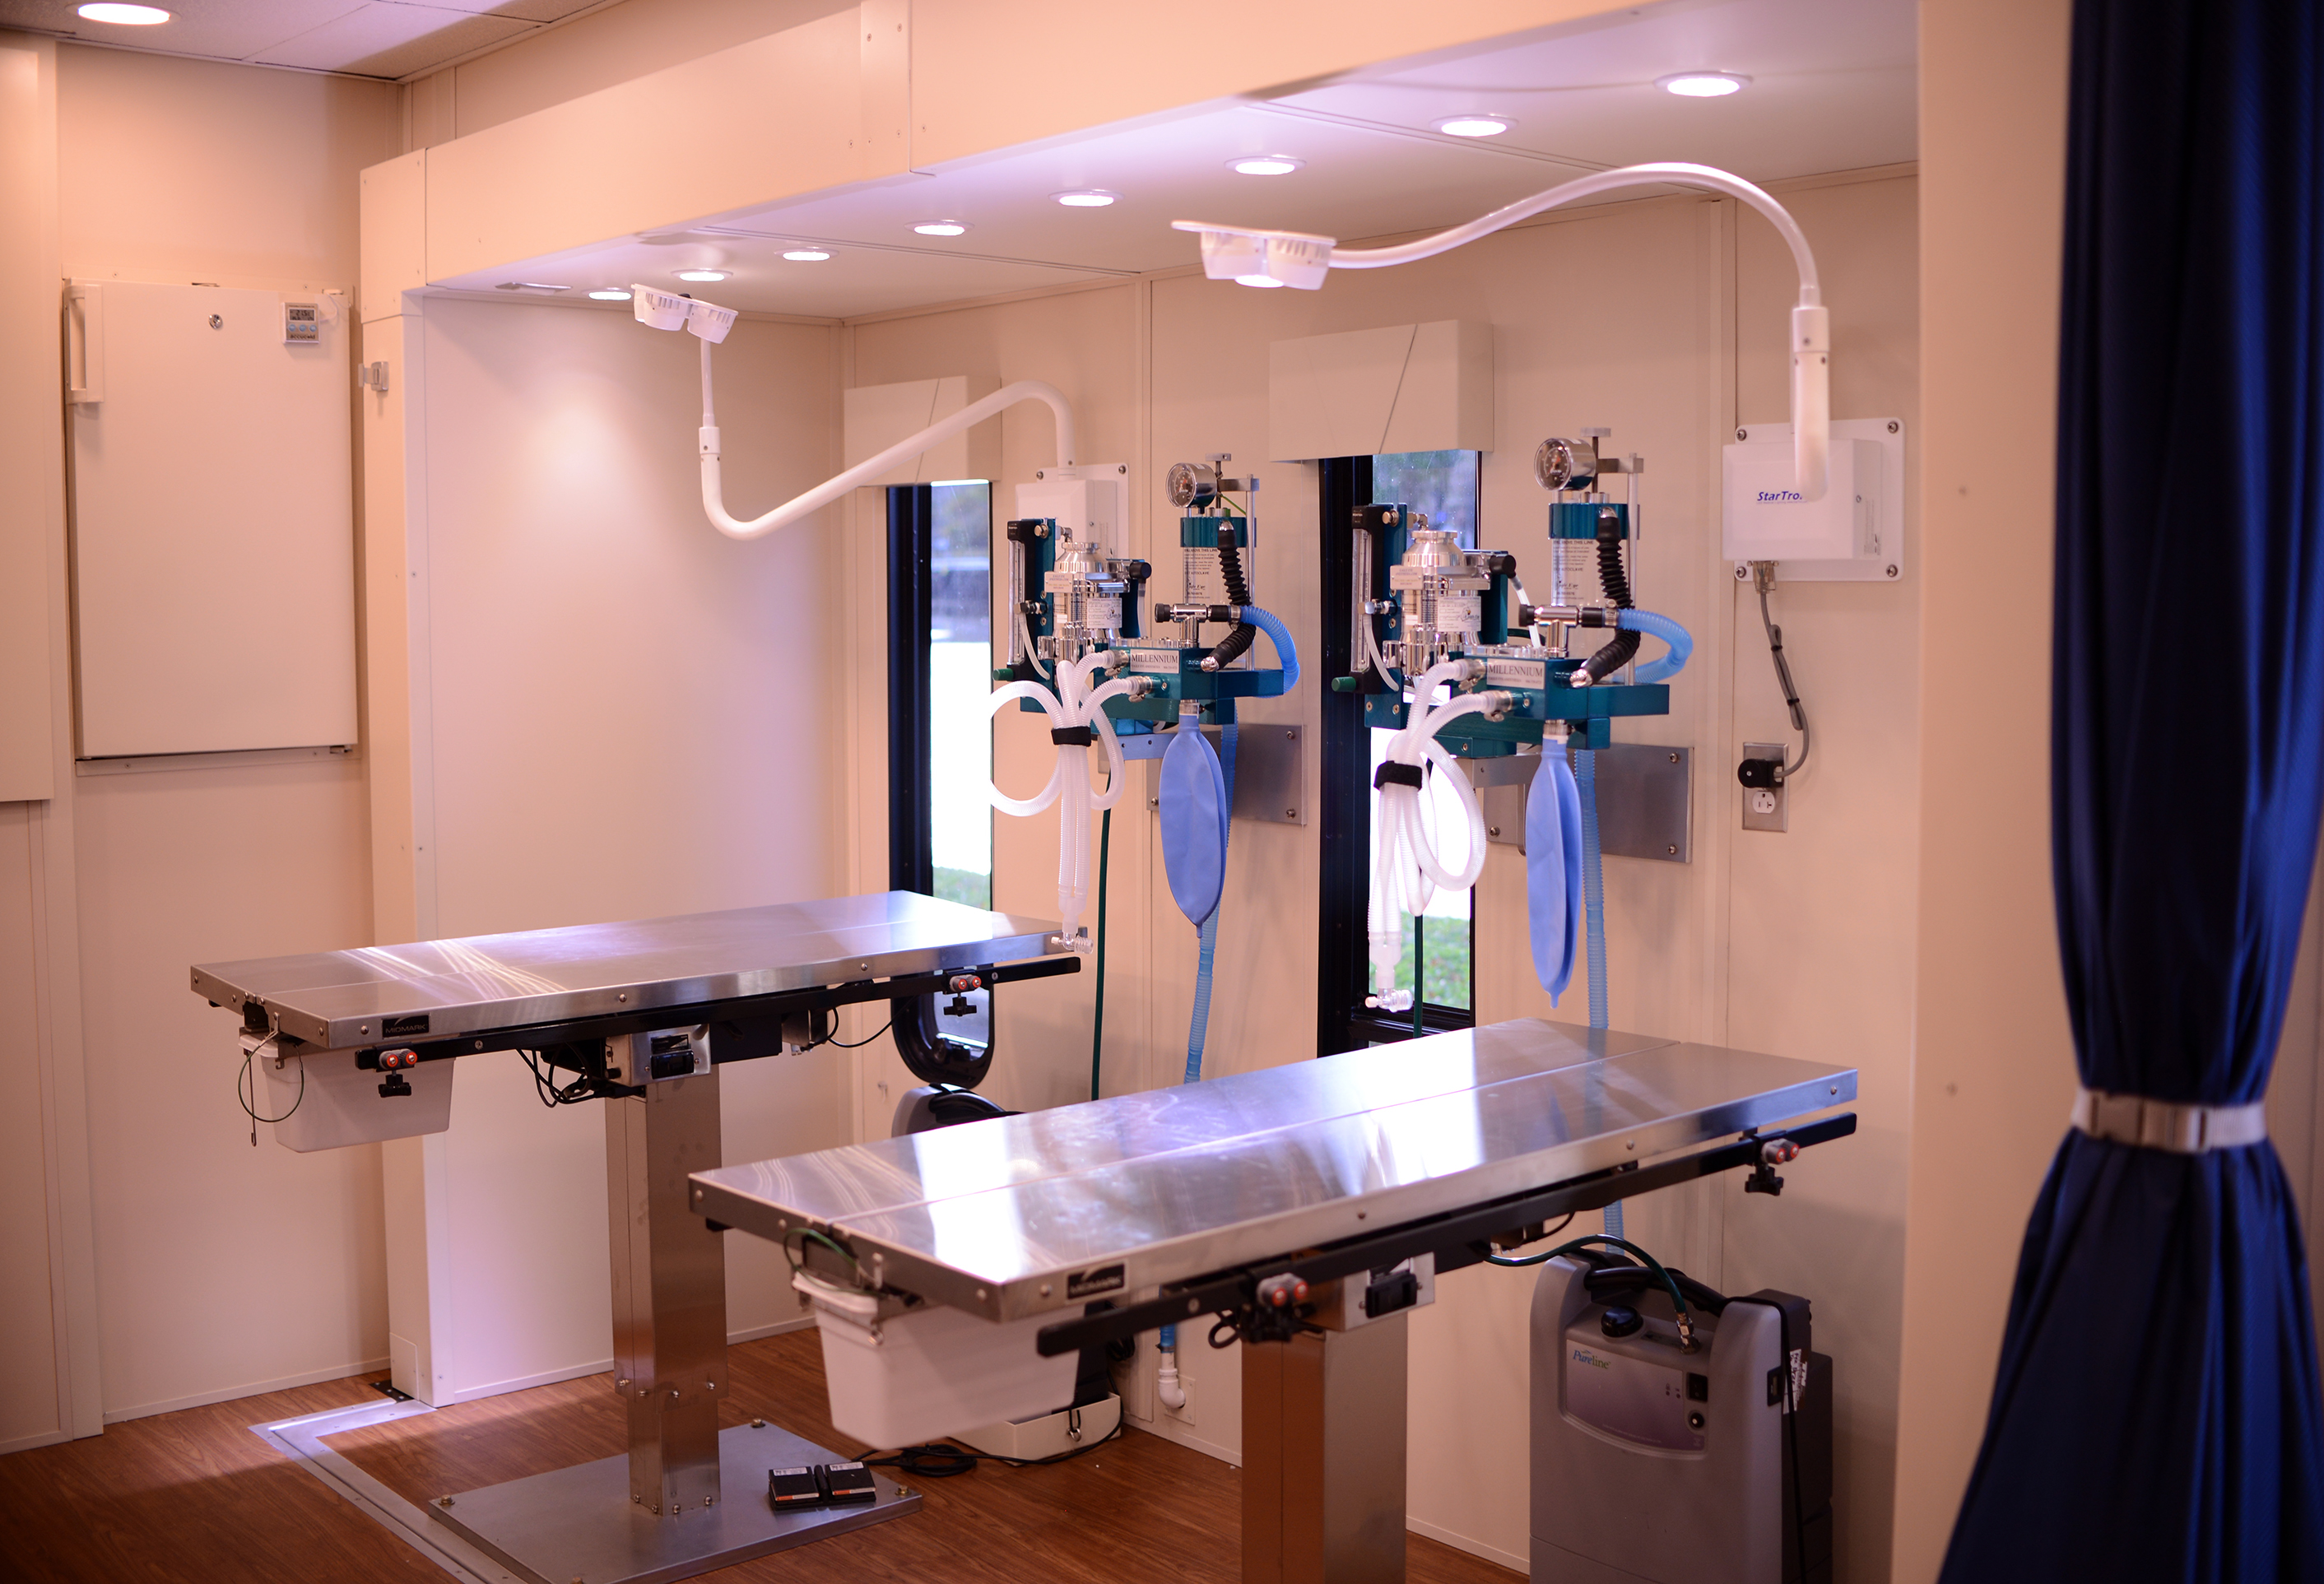 Two metal surgical tables with other surgical equipment above are shown inside a clinic space